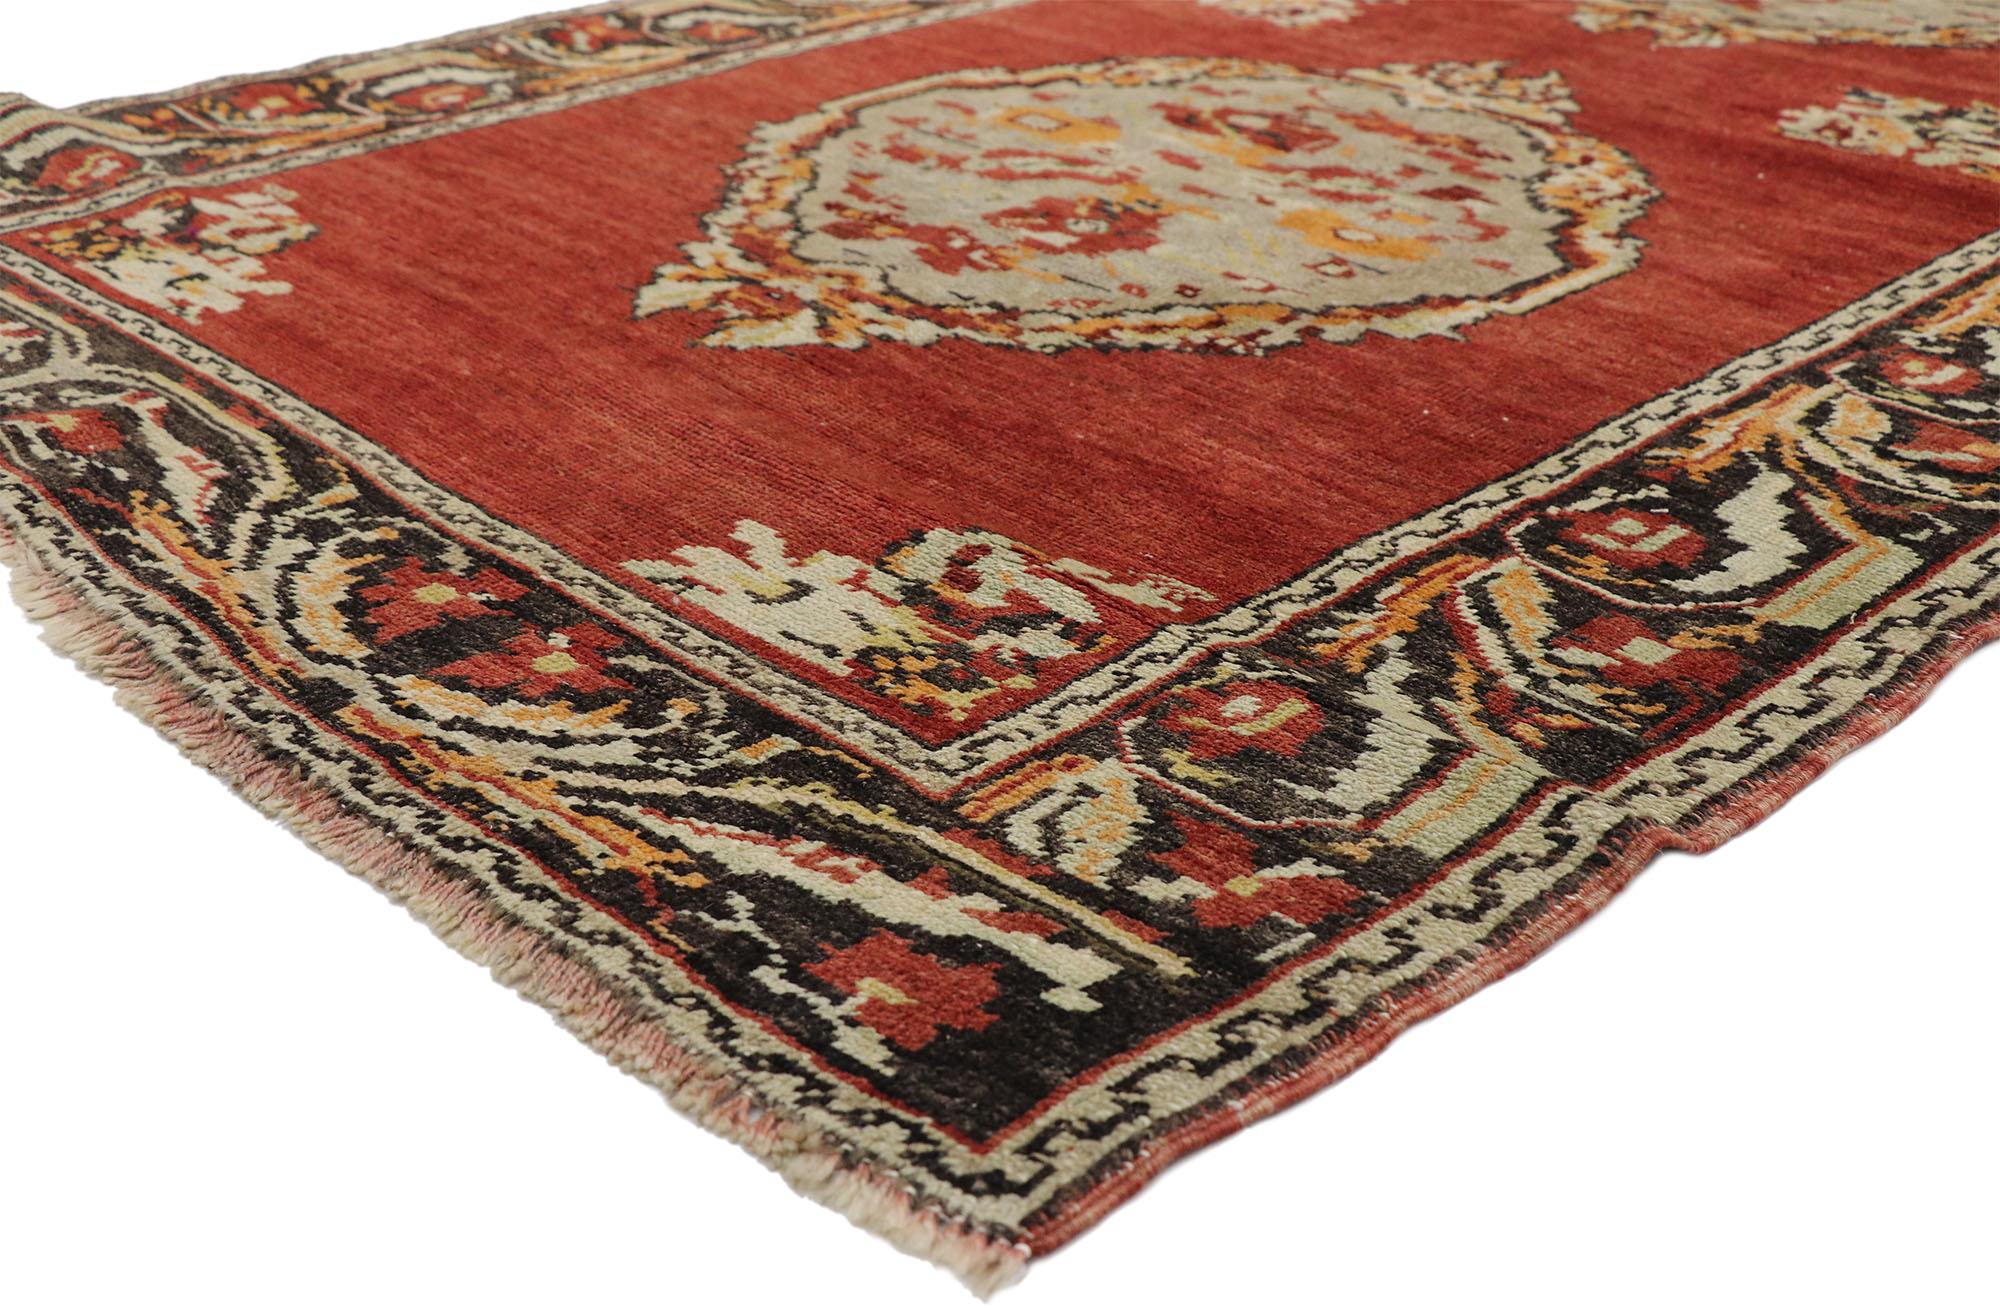 52128 Vintage Turkish Oushak Hallway Runner with Neoclassical Art Nouveau Style. This hand knotted wool vintage Turkish Oushak runner features three round medallions with abstract floral motifs across an abrashed red field. Bouquets are spread